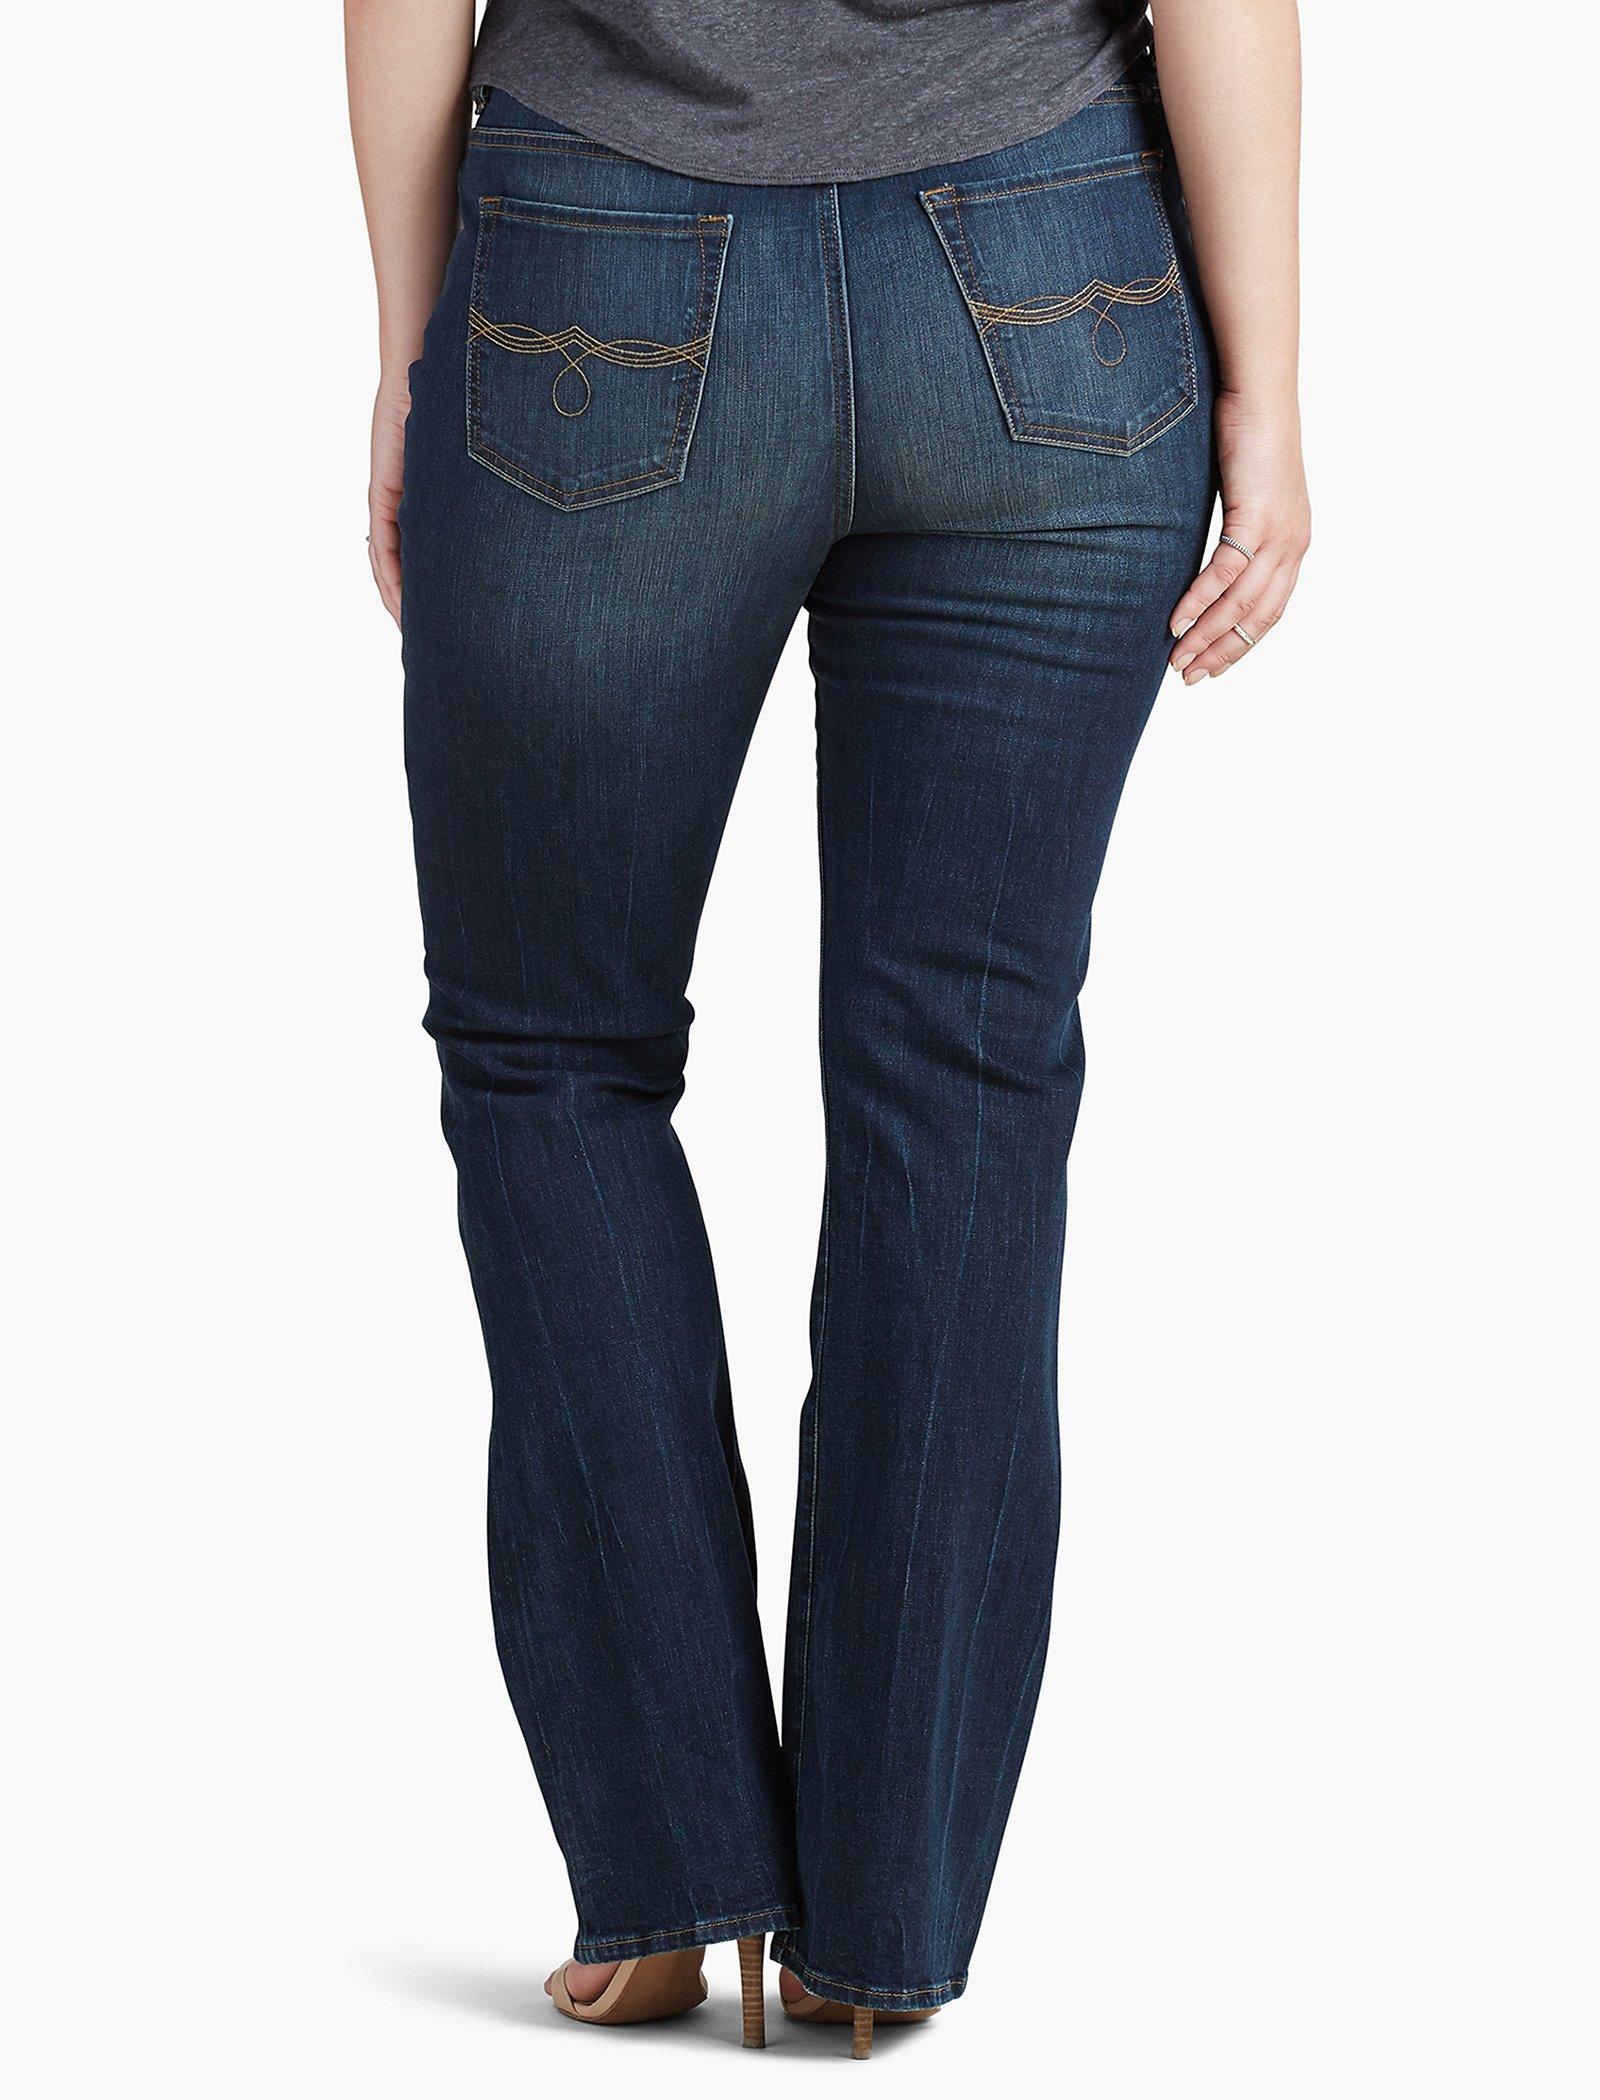 PLUS SIZE EMMA BOOTCUT JEAN IN IRVINE | Lucky Brand